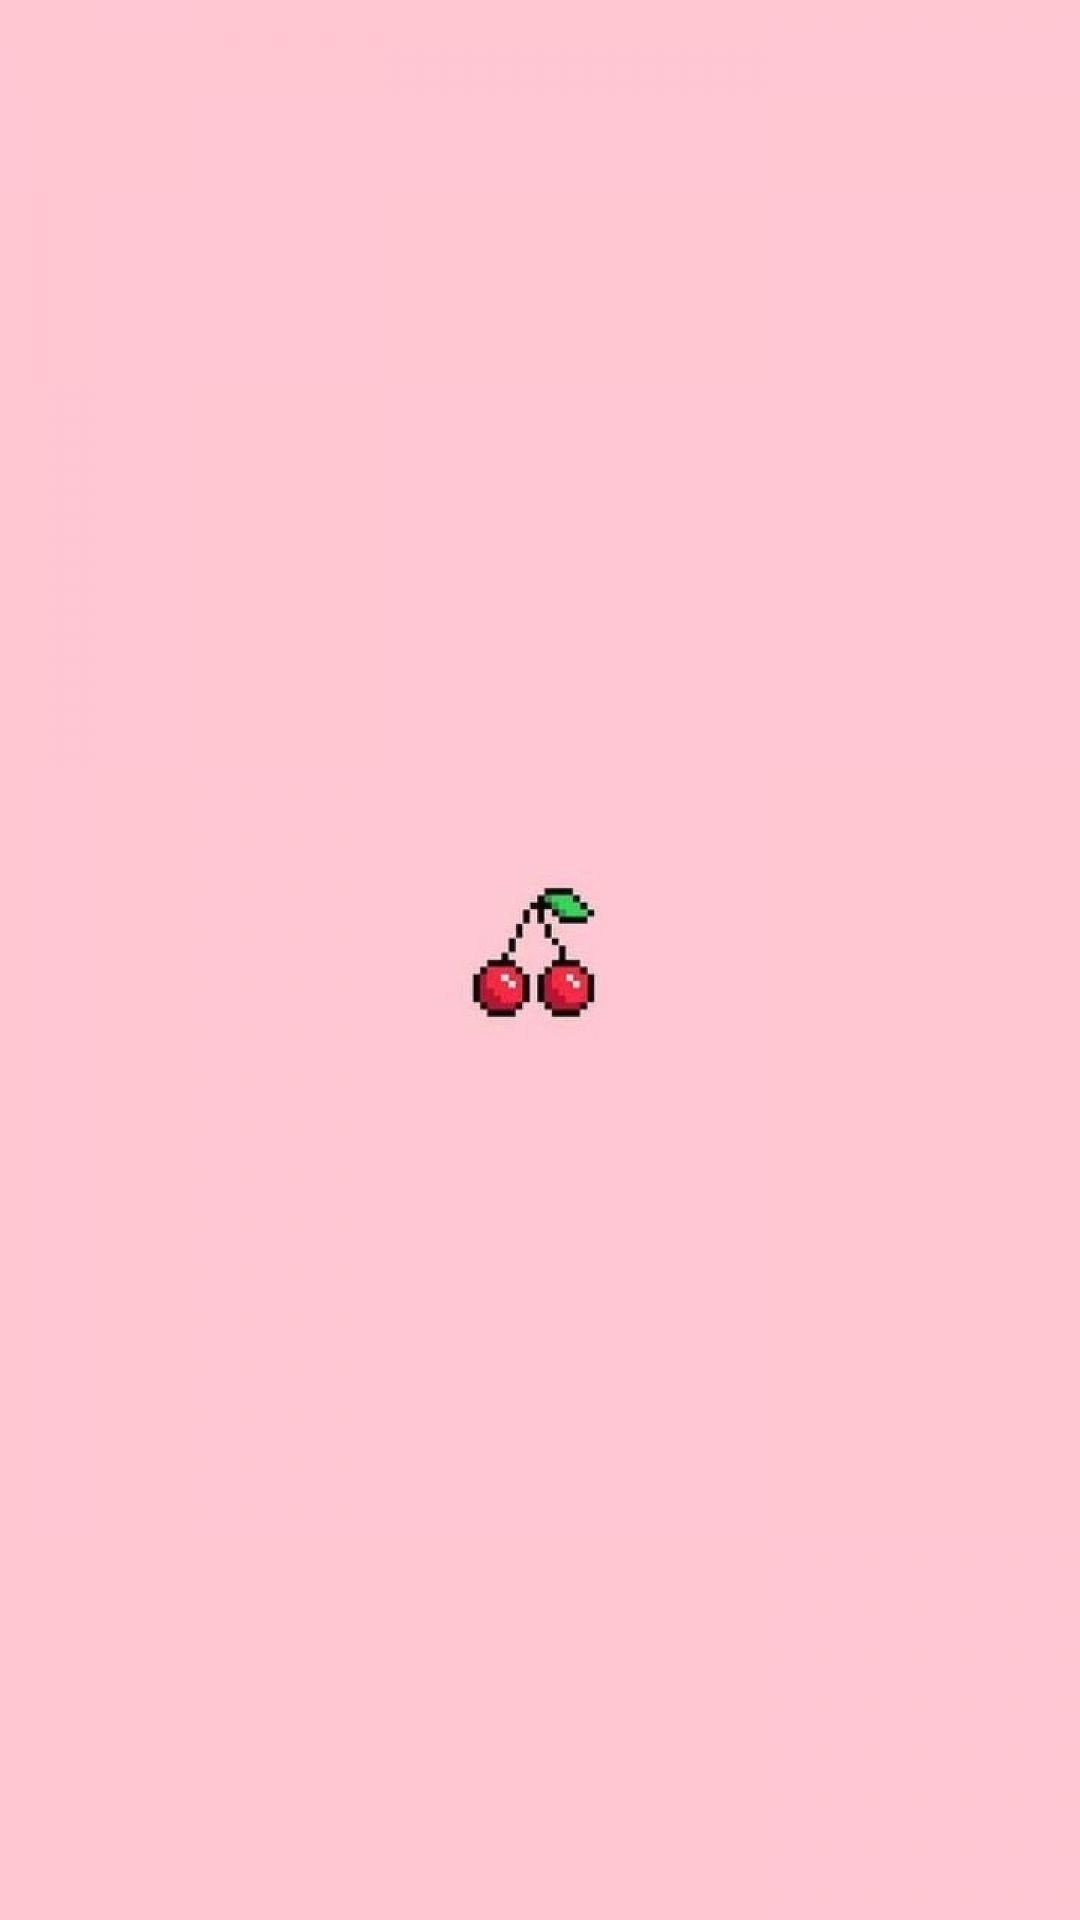 ✓[75+] Cherry Aesthetic - Android, iPhone, Desktop HD Backgrounds /  Wallpapers (1080p, 4k) (png / jpg) (2023)